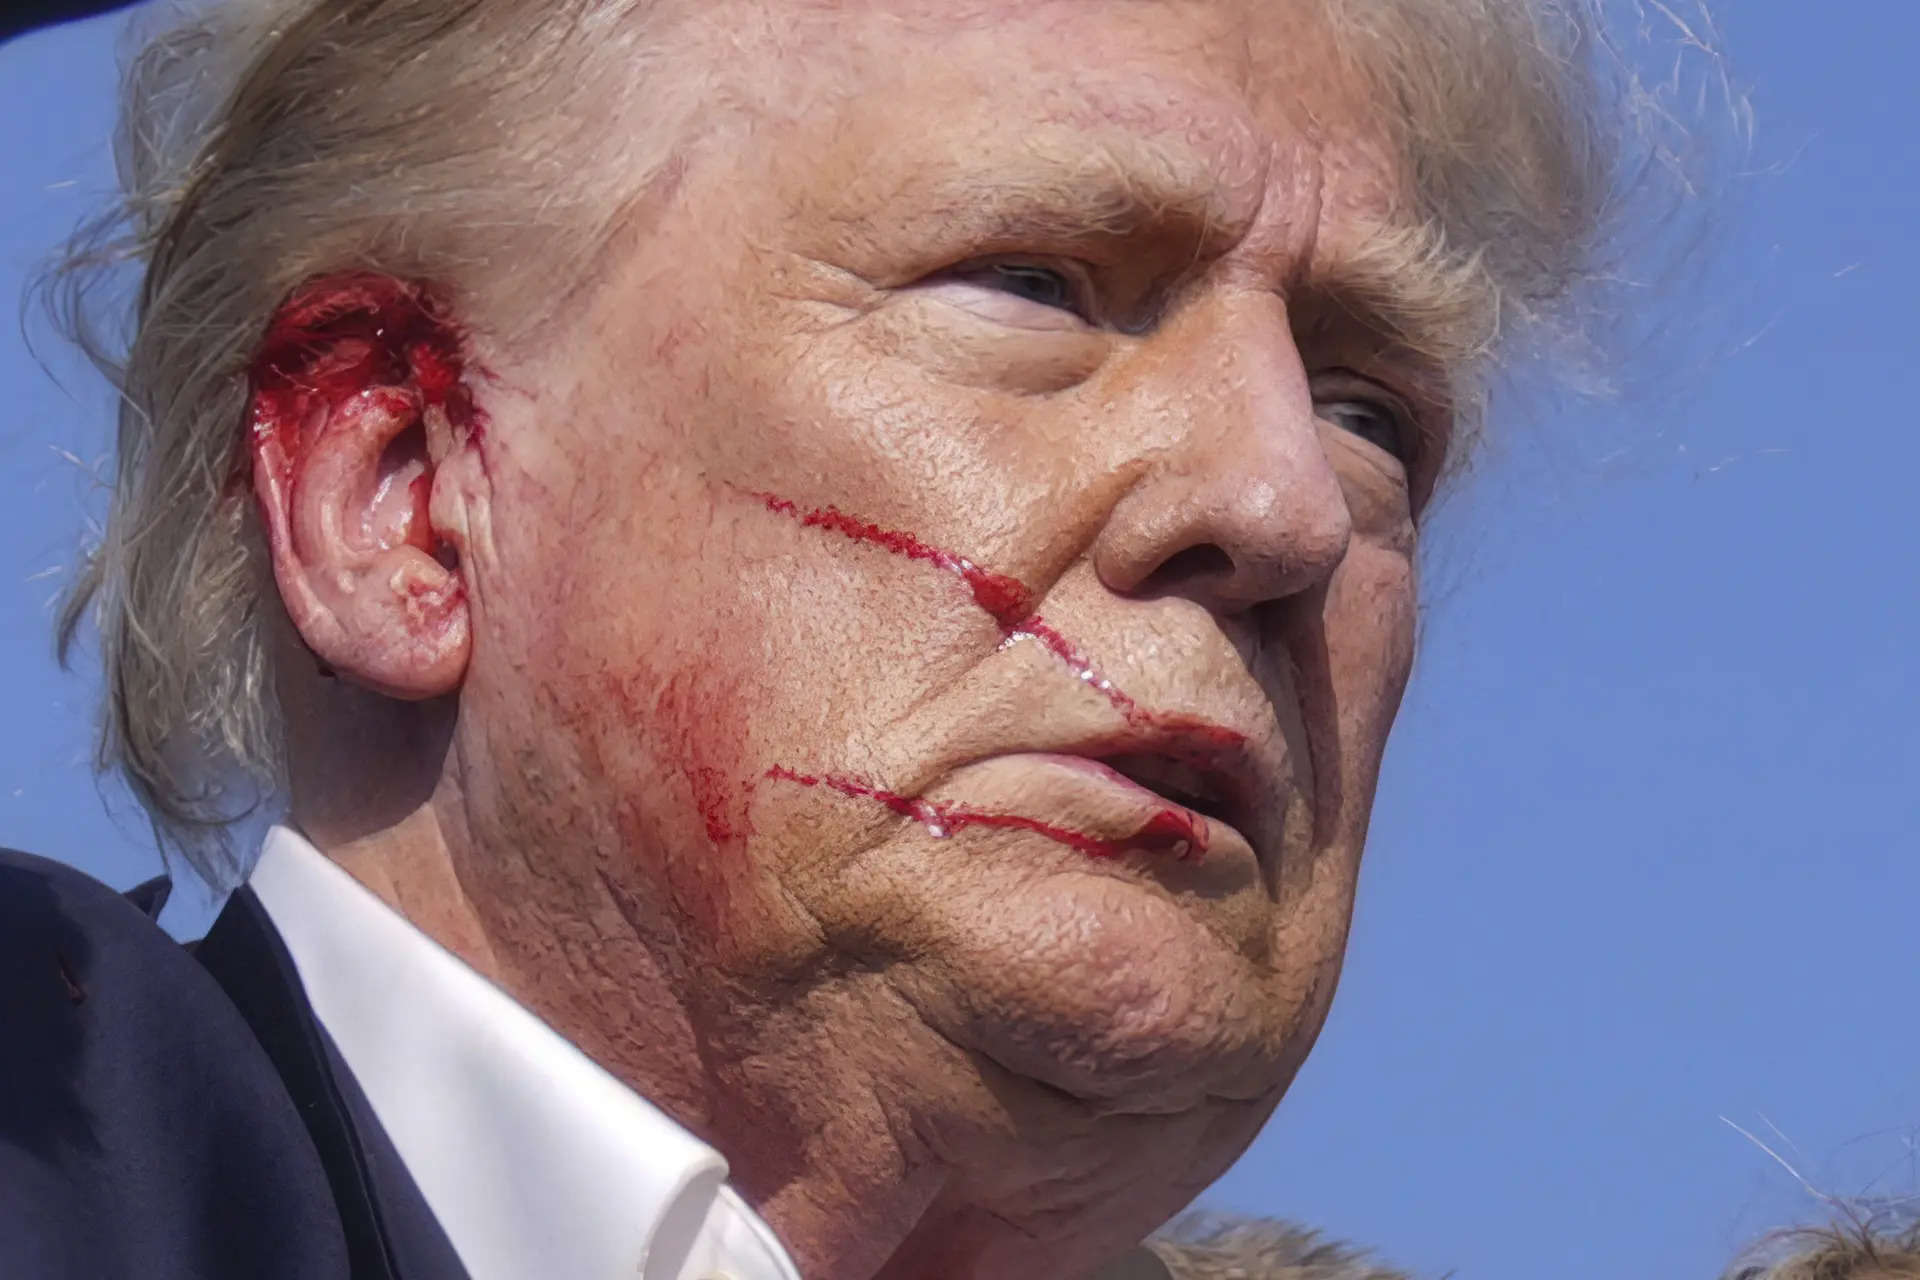 'I'm supposed to be dead' Trump tells NYP after assassination bid 